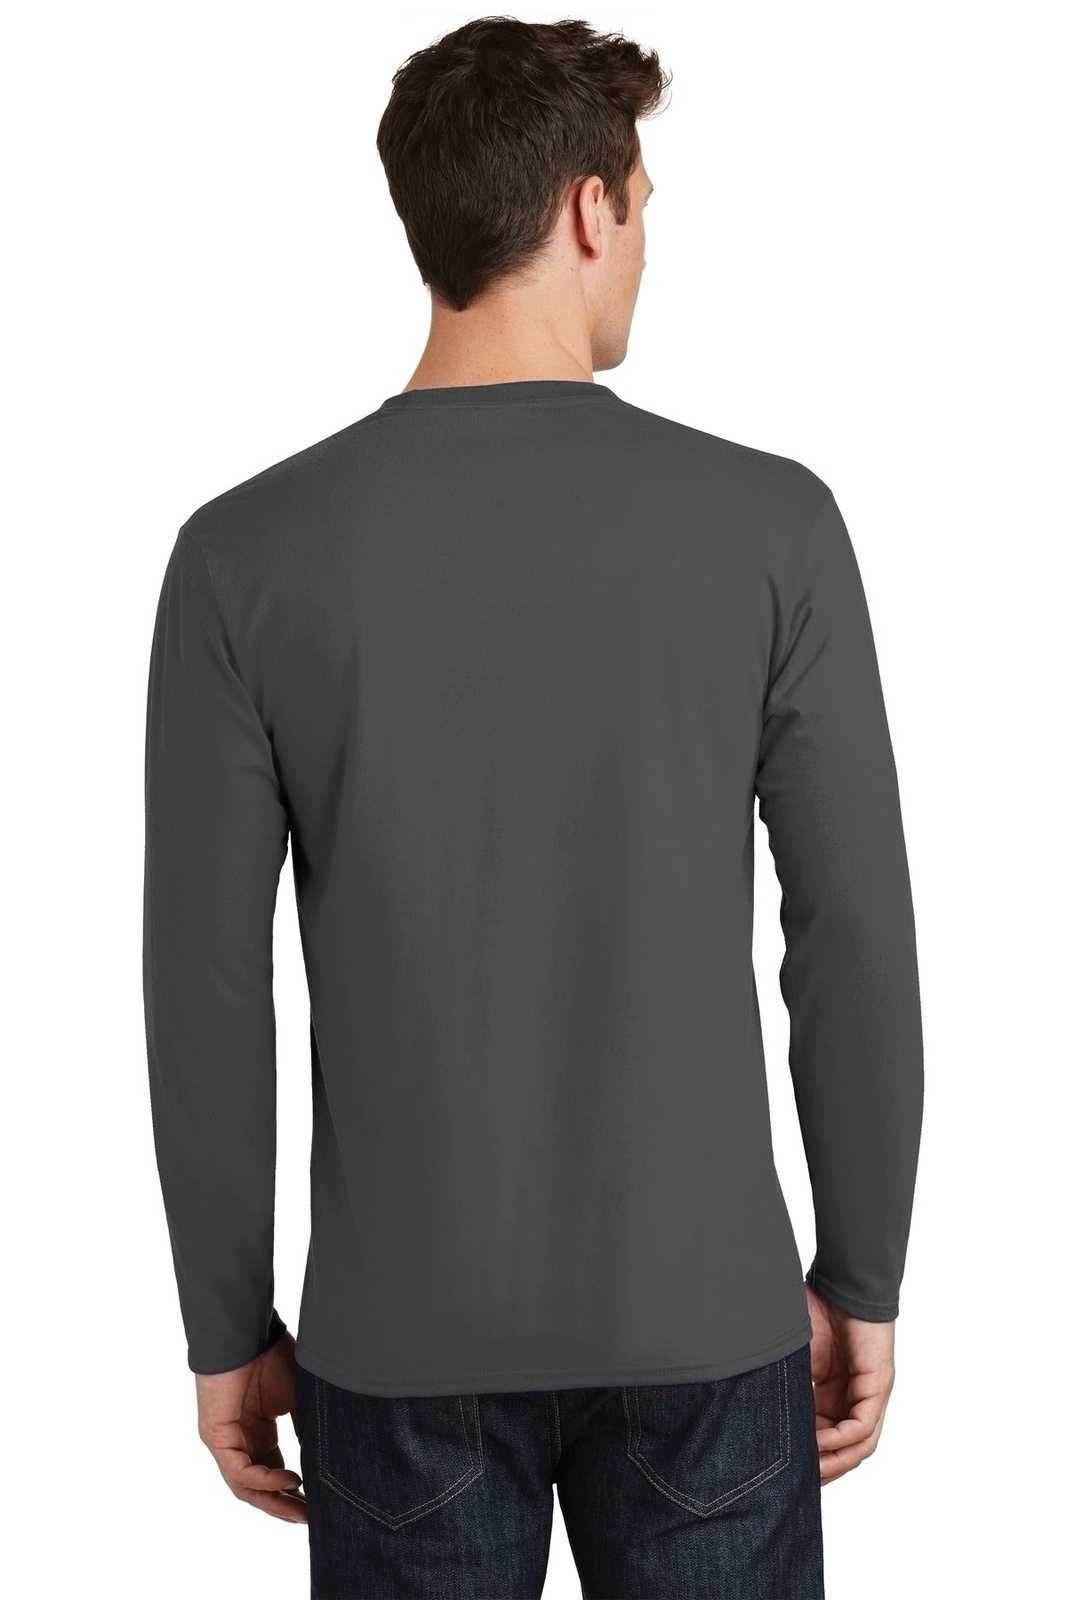 Port &amp; Company PC450LS Long Sleeve Fan Favorite Tee - Charcoal - HIT a Double - 2